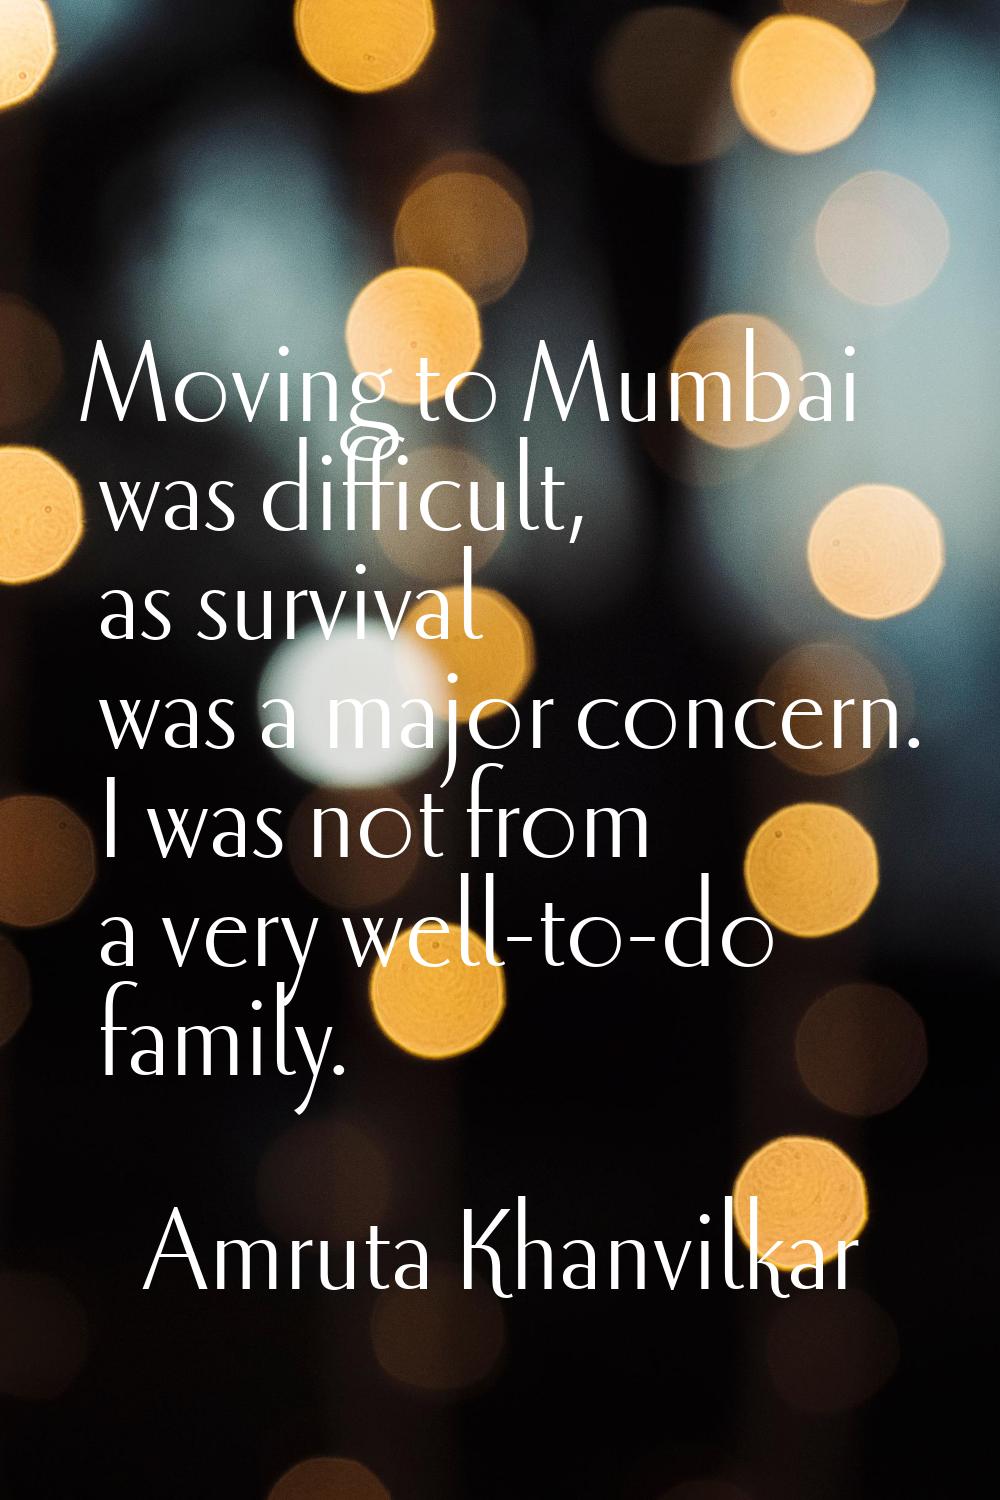 Moving to Mumbai was difficult, as survival was a major concern. I was not from a very well-to-do f